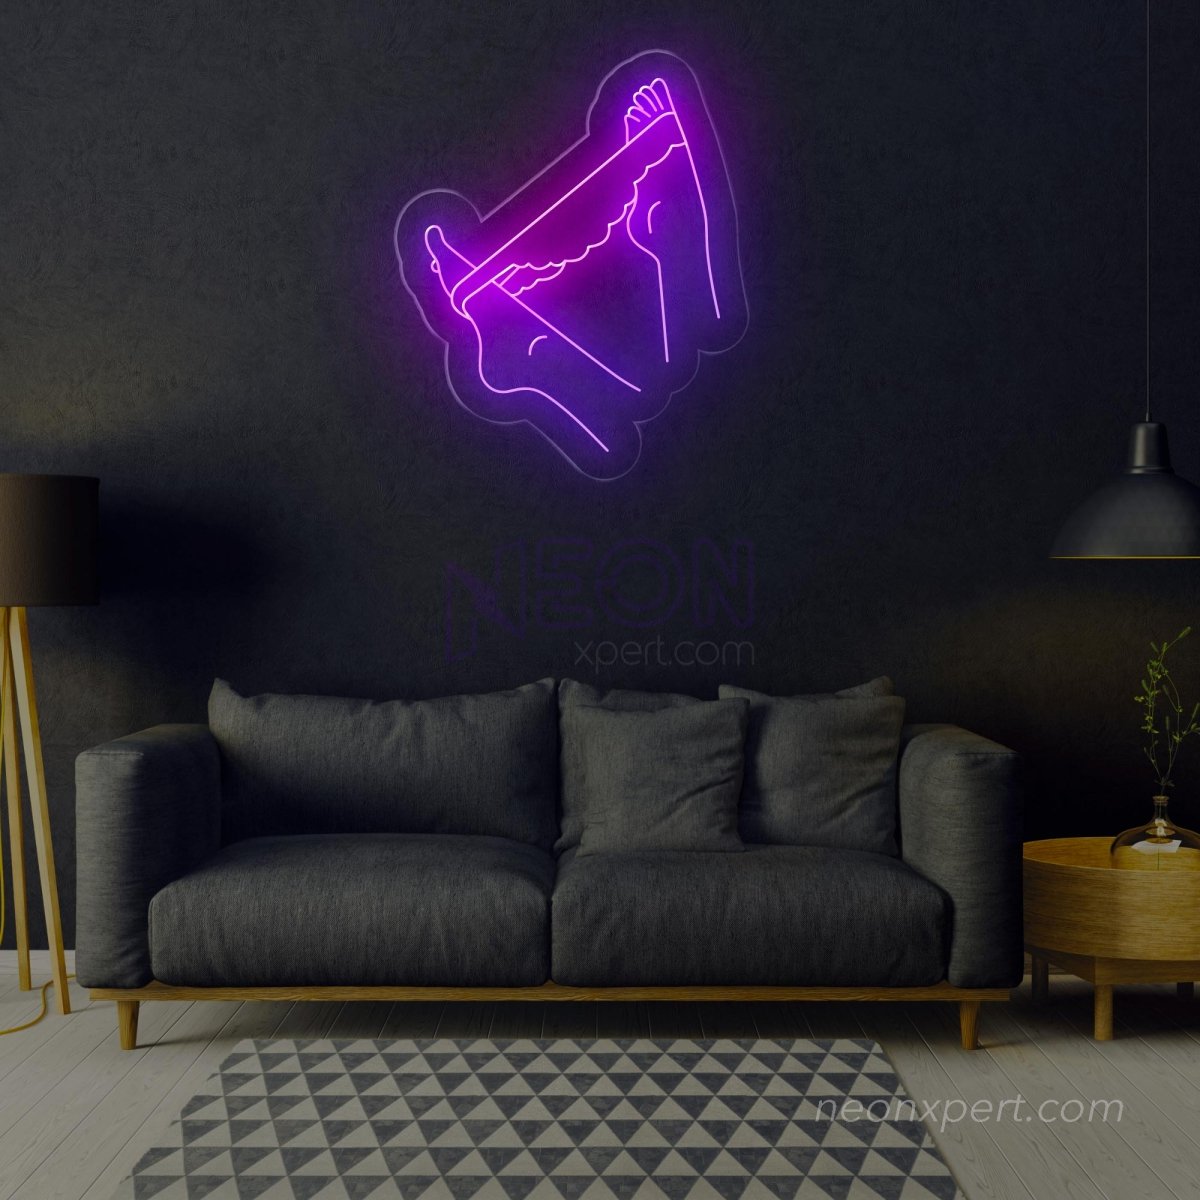 Aesthetic Female Body Neon Sign Sexy Girl Led Light for Contemporary Spaces - NeonXpert